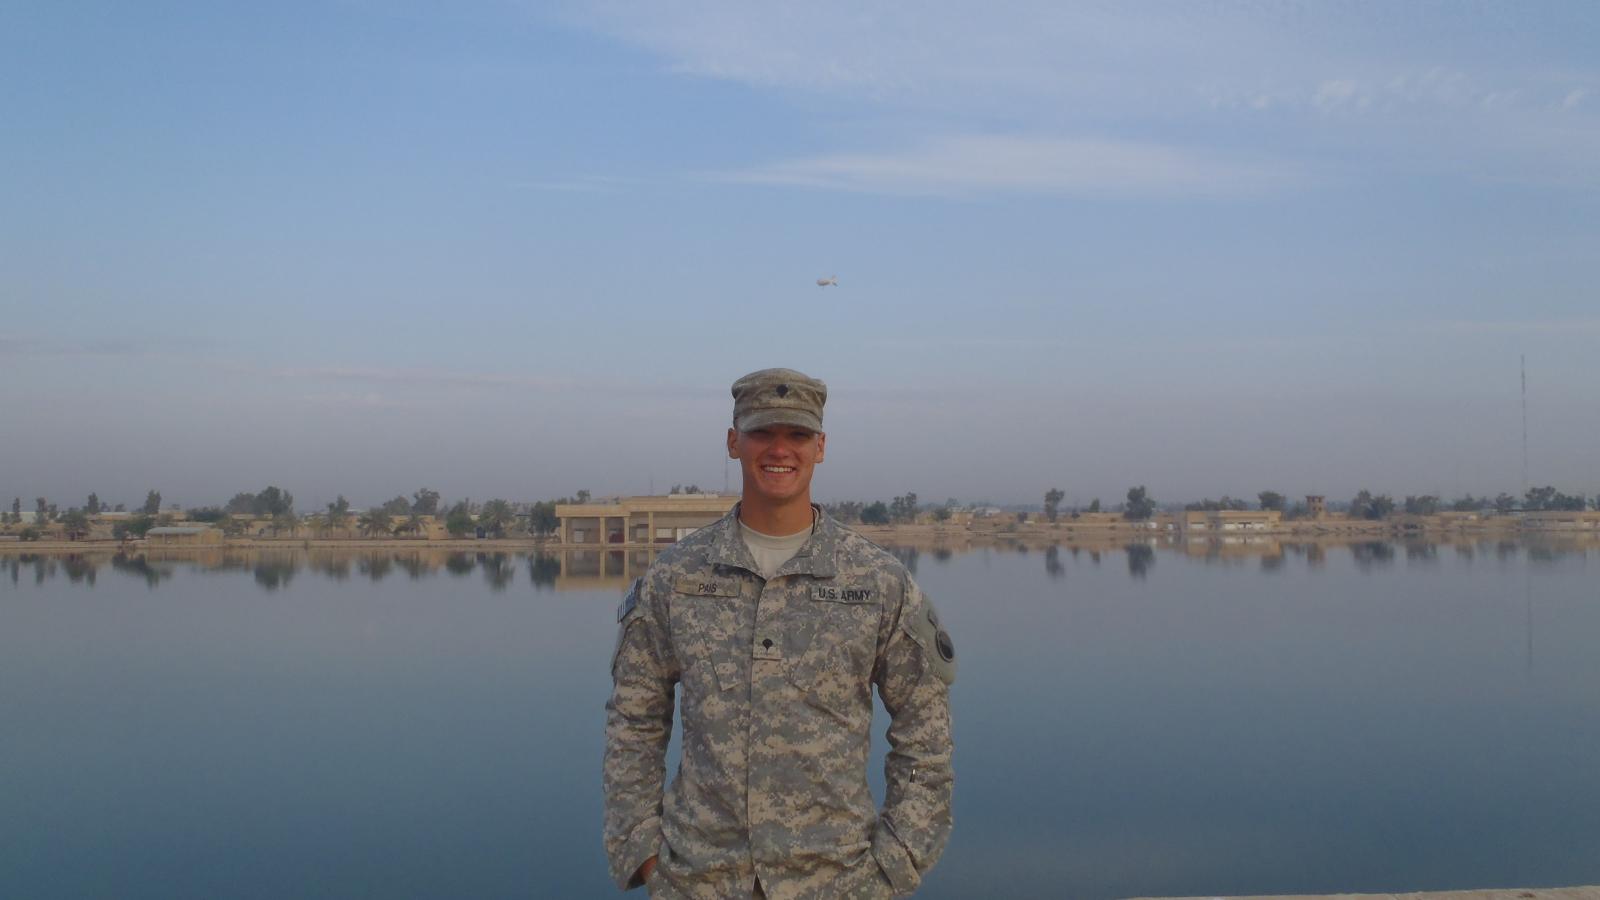 Chris Pais, pictured in Iraq, joined the Virginia Army National Guard in 2009. Photo courtesy of Chris Pais